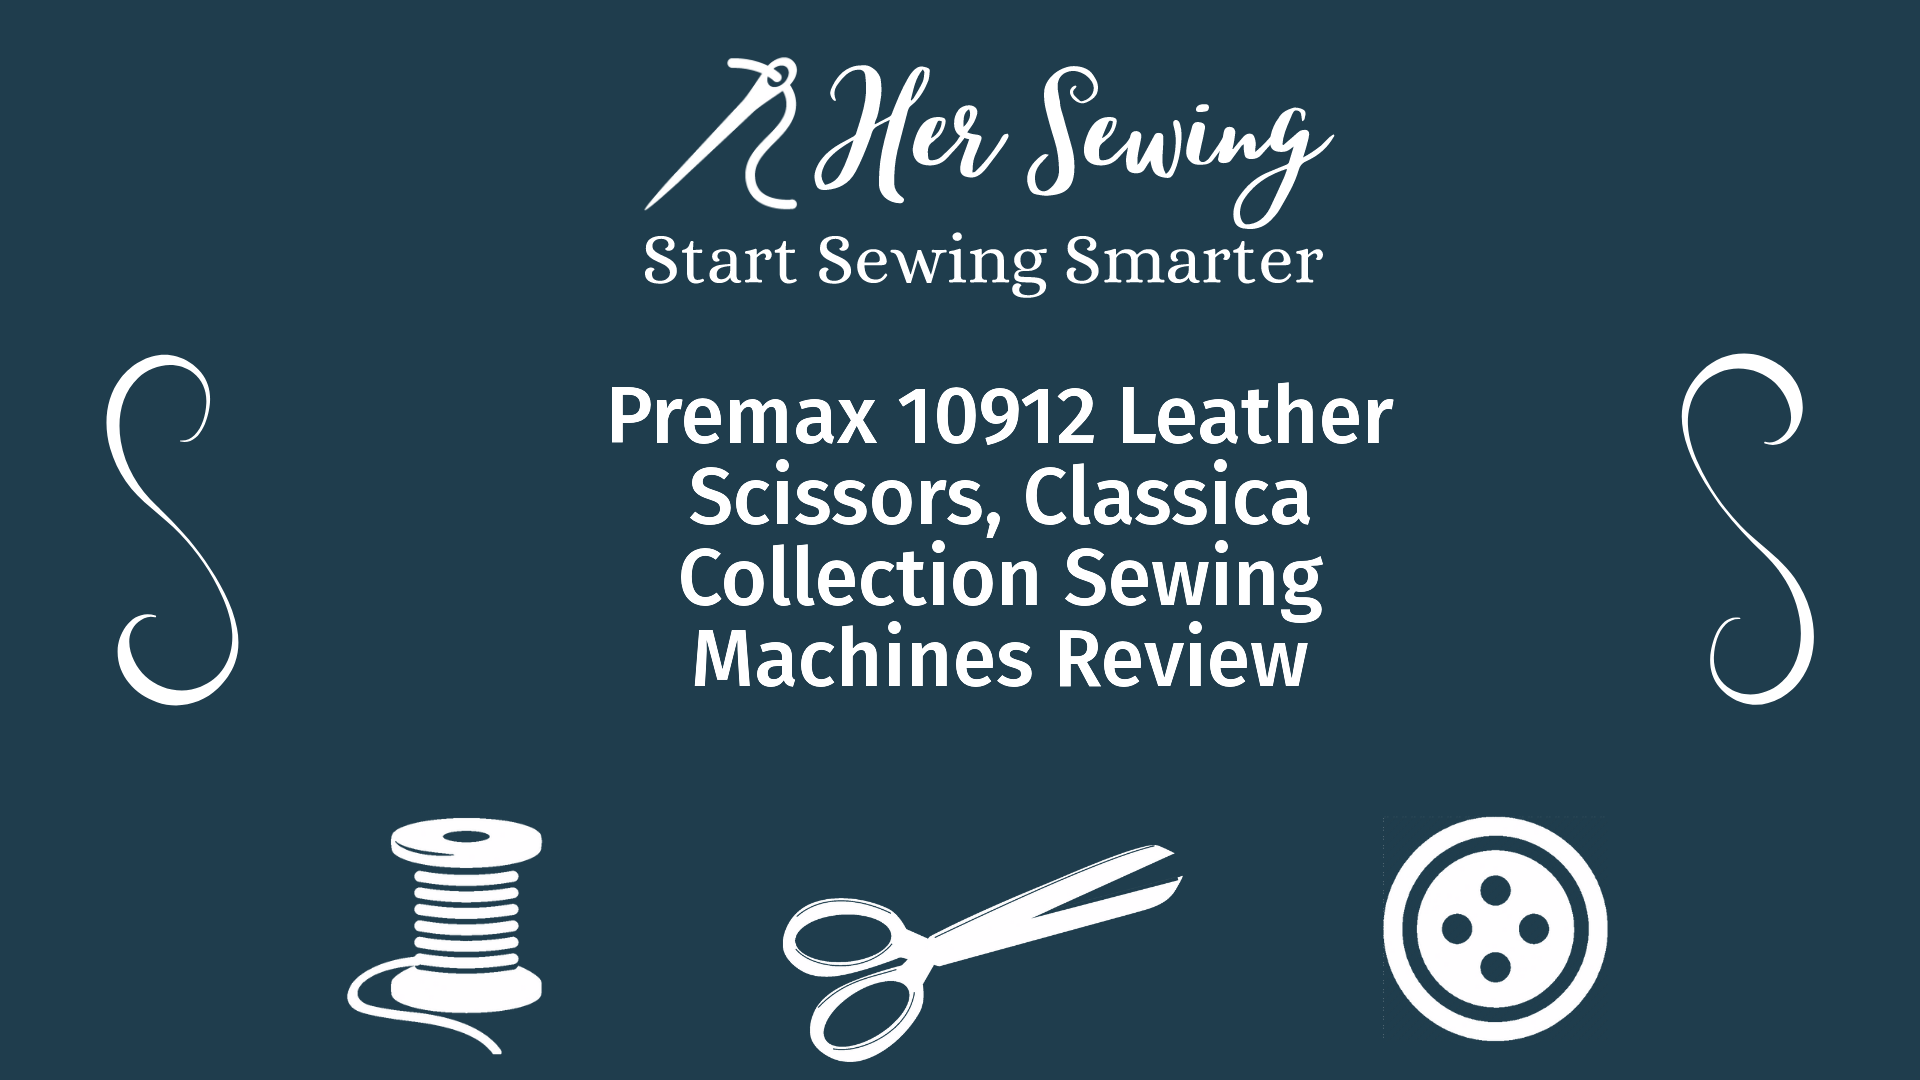 Premax 10912 Leather Scissors, Classica Collection Sewing Machines Review